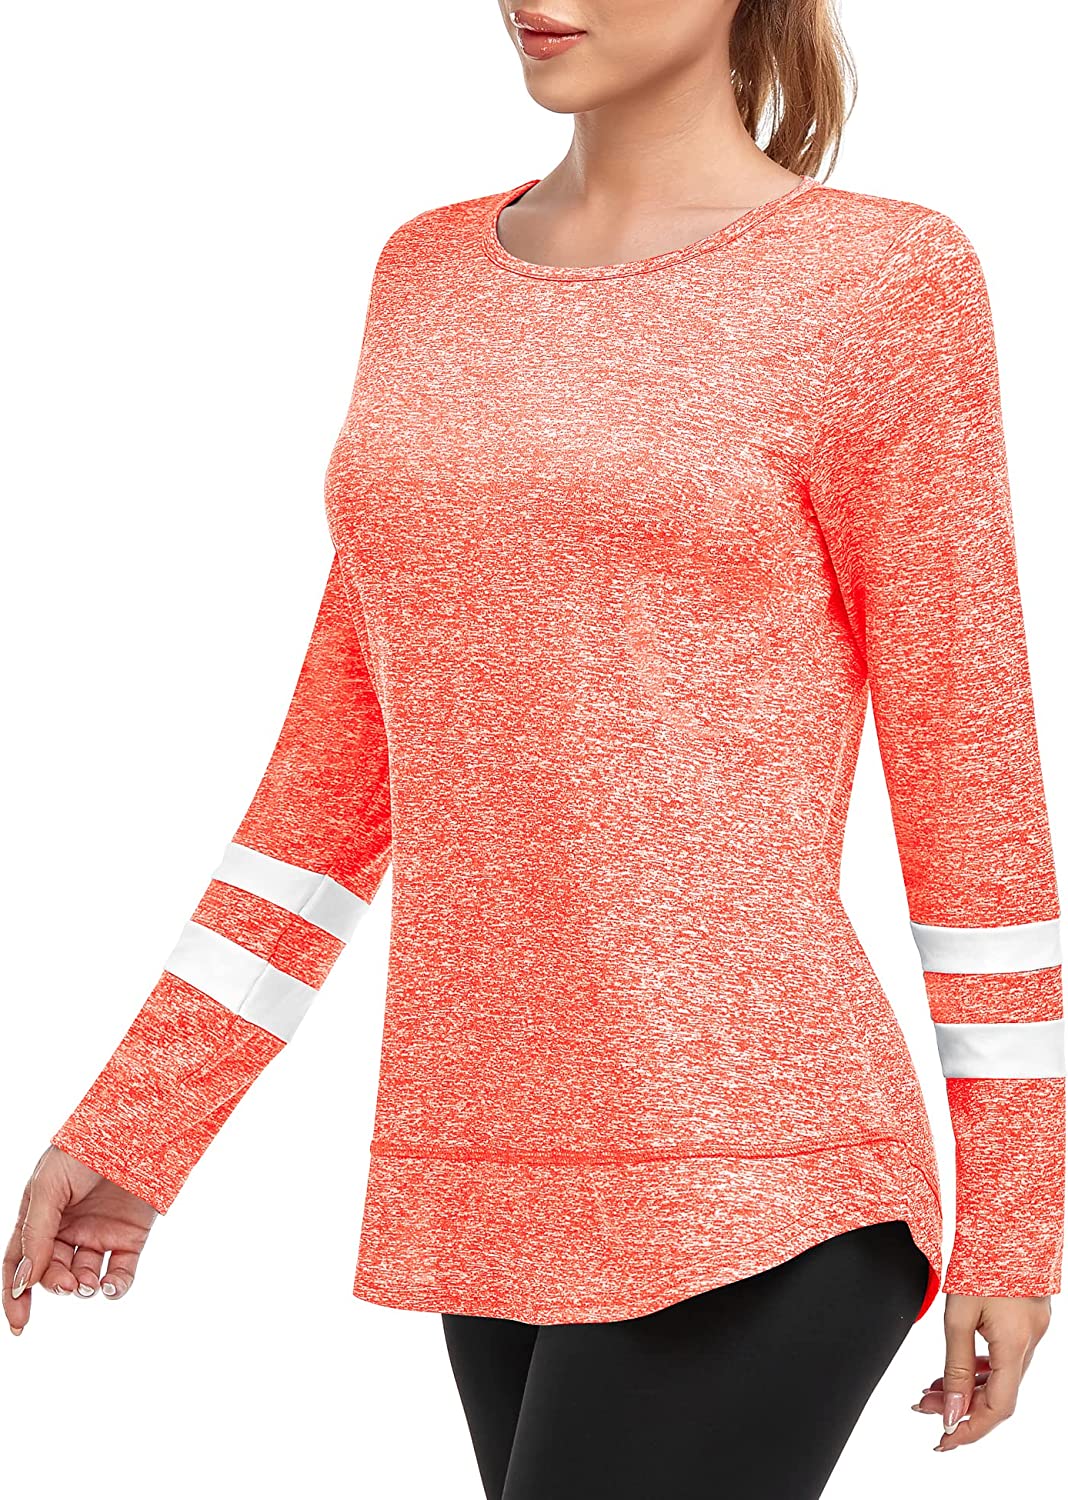 Women's Long Sleeve Workout Shirts Stripe Crew Neck Dry Fit Tops